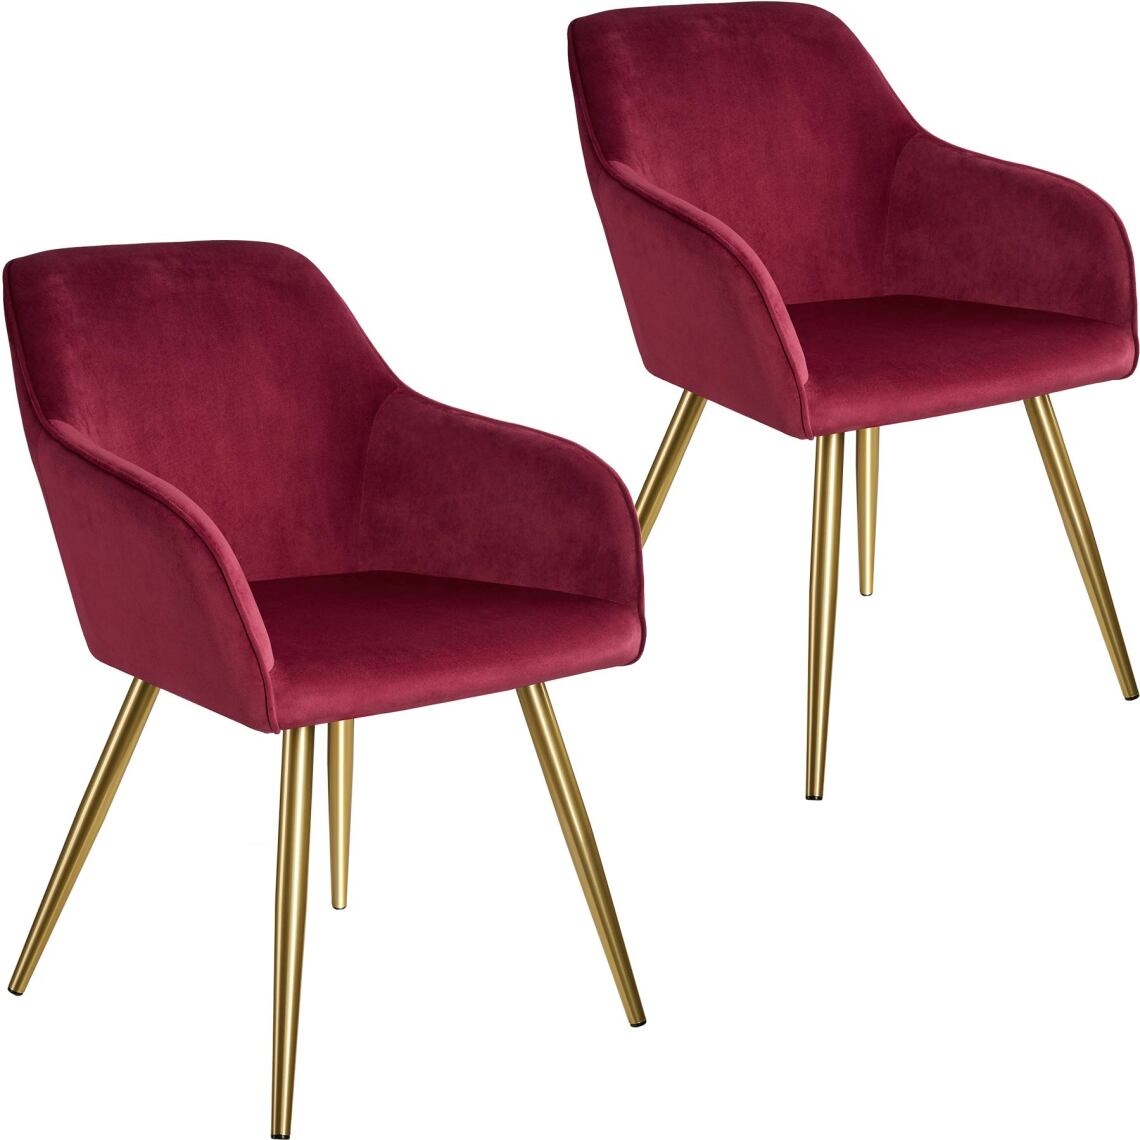 Tectake - 2 Chaises MARILYN Effet Velours Style Scandinave - bordeaux/or - Chaises